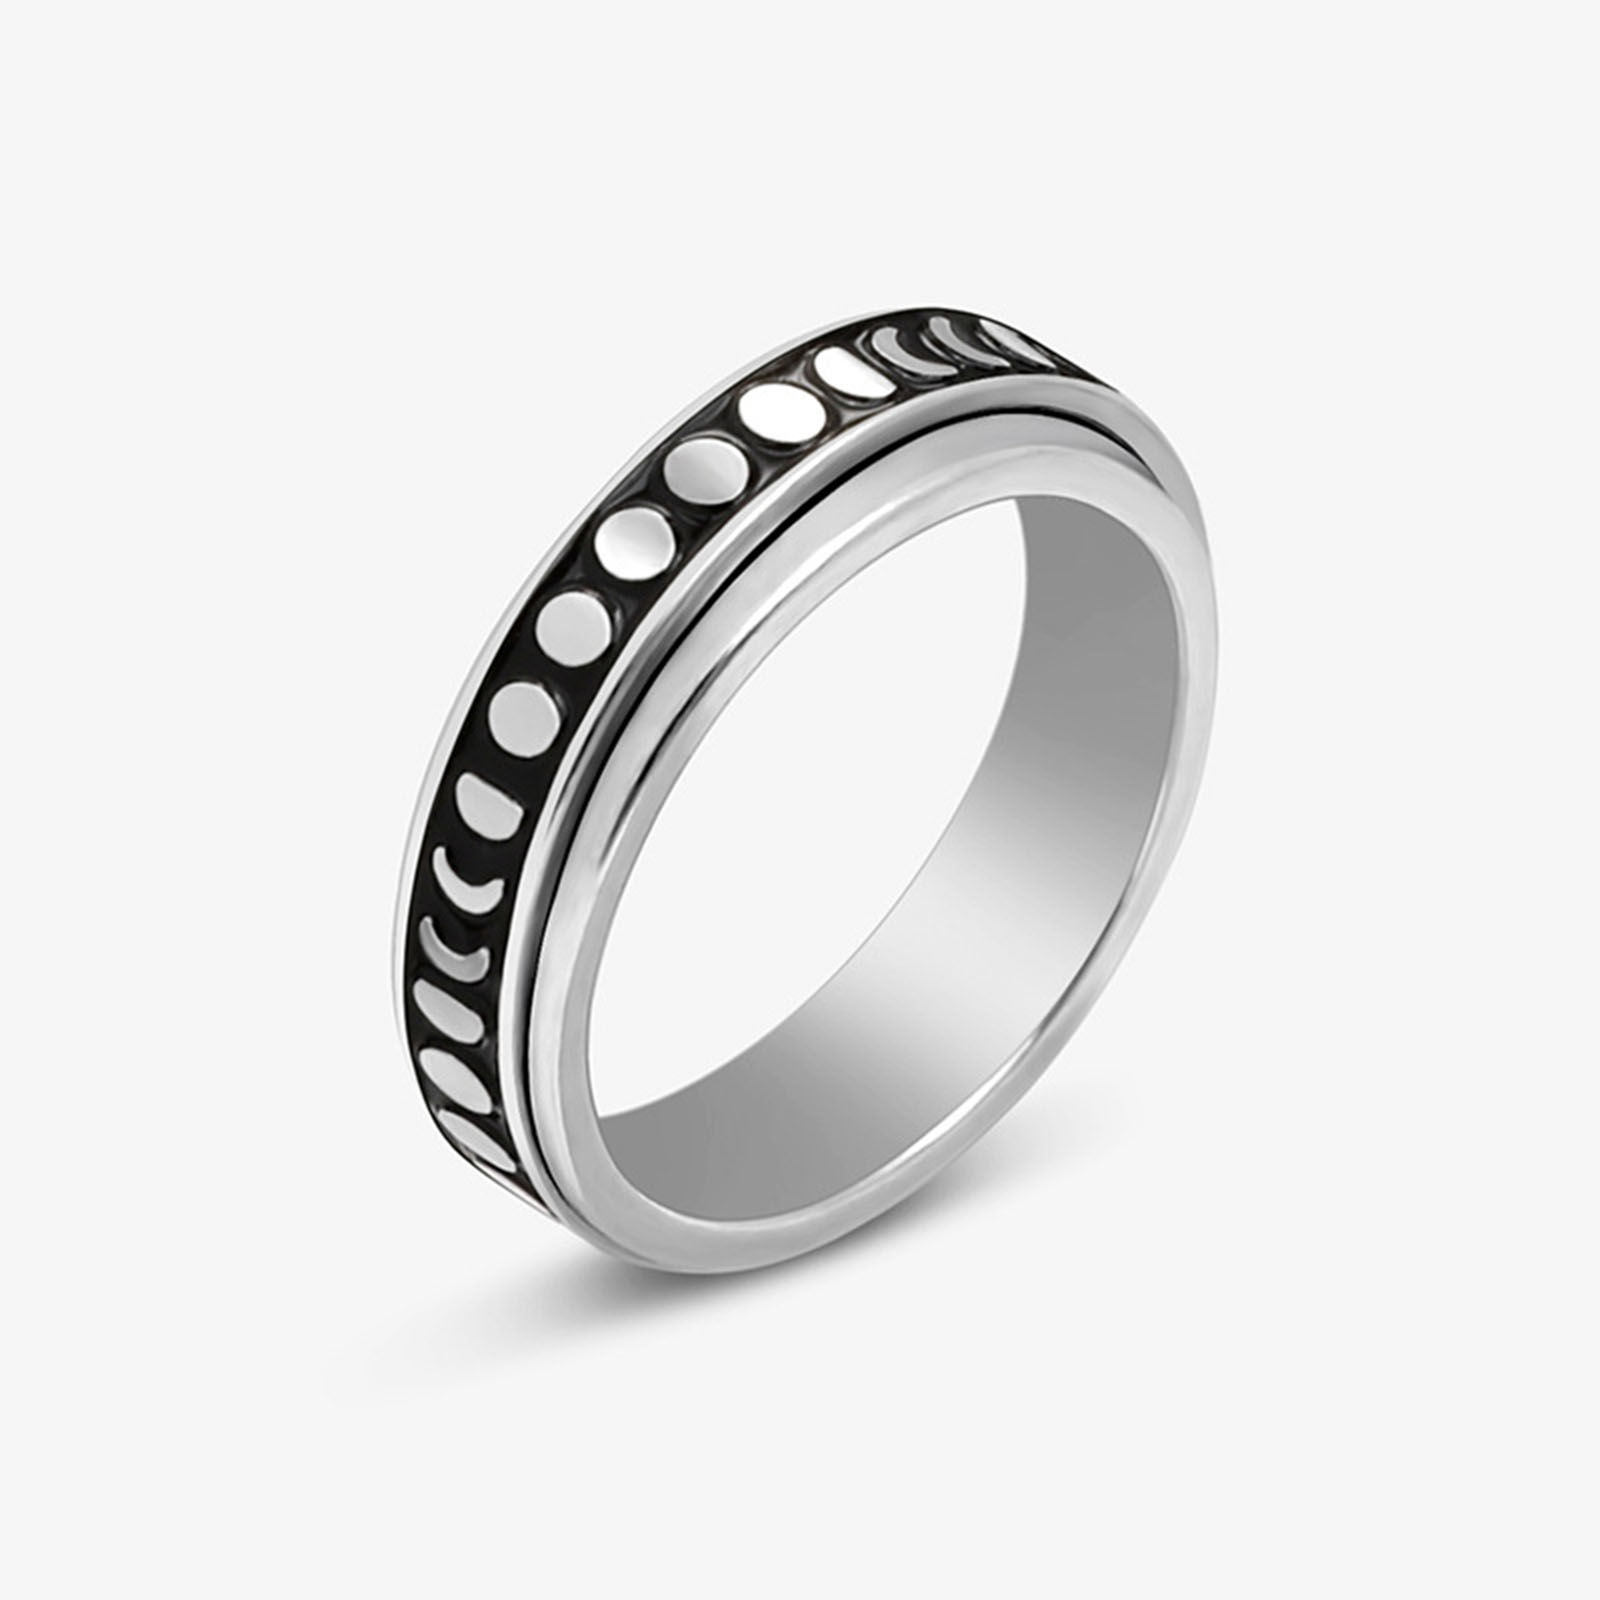 Picture of Stainless Steel Unadjustable Spinner Rings Fidget Ring Stress Relieving Anxiety Ring Silver Tone Black Rotatable Half Moon Enamel 17.3mm(US Size 7), 1 Piece